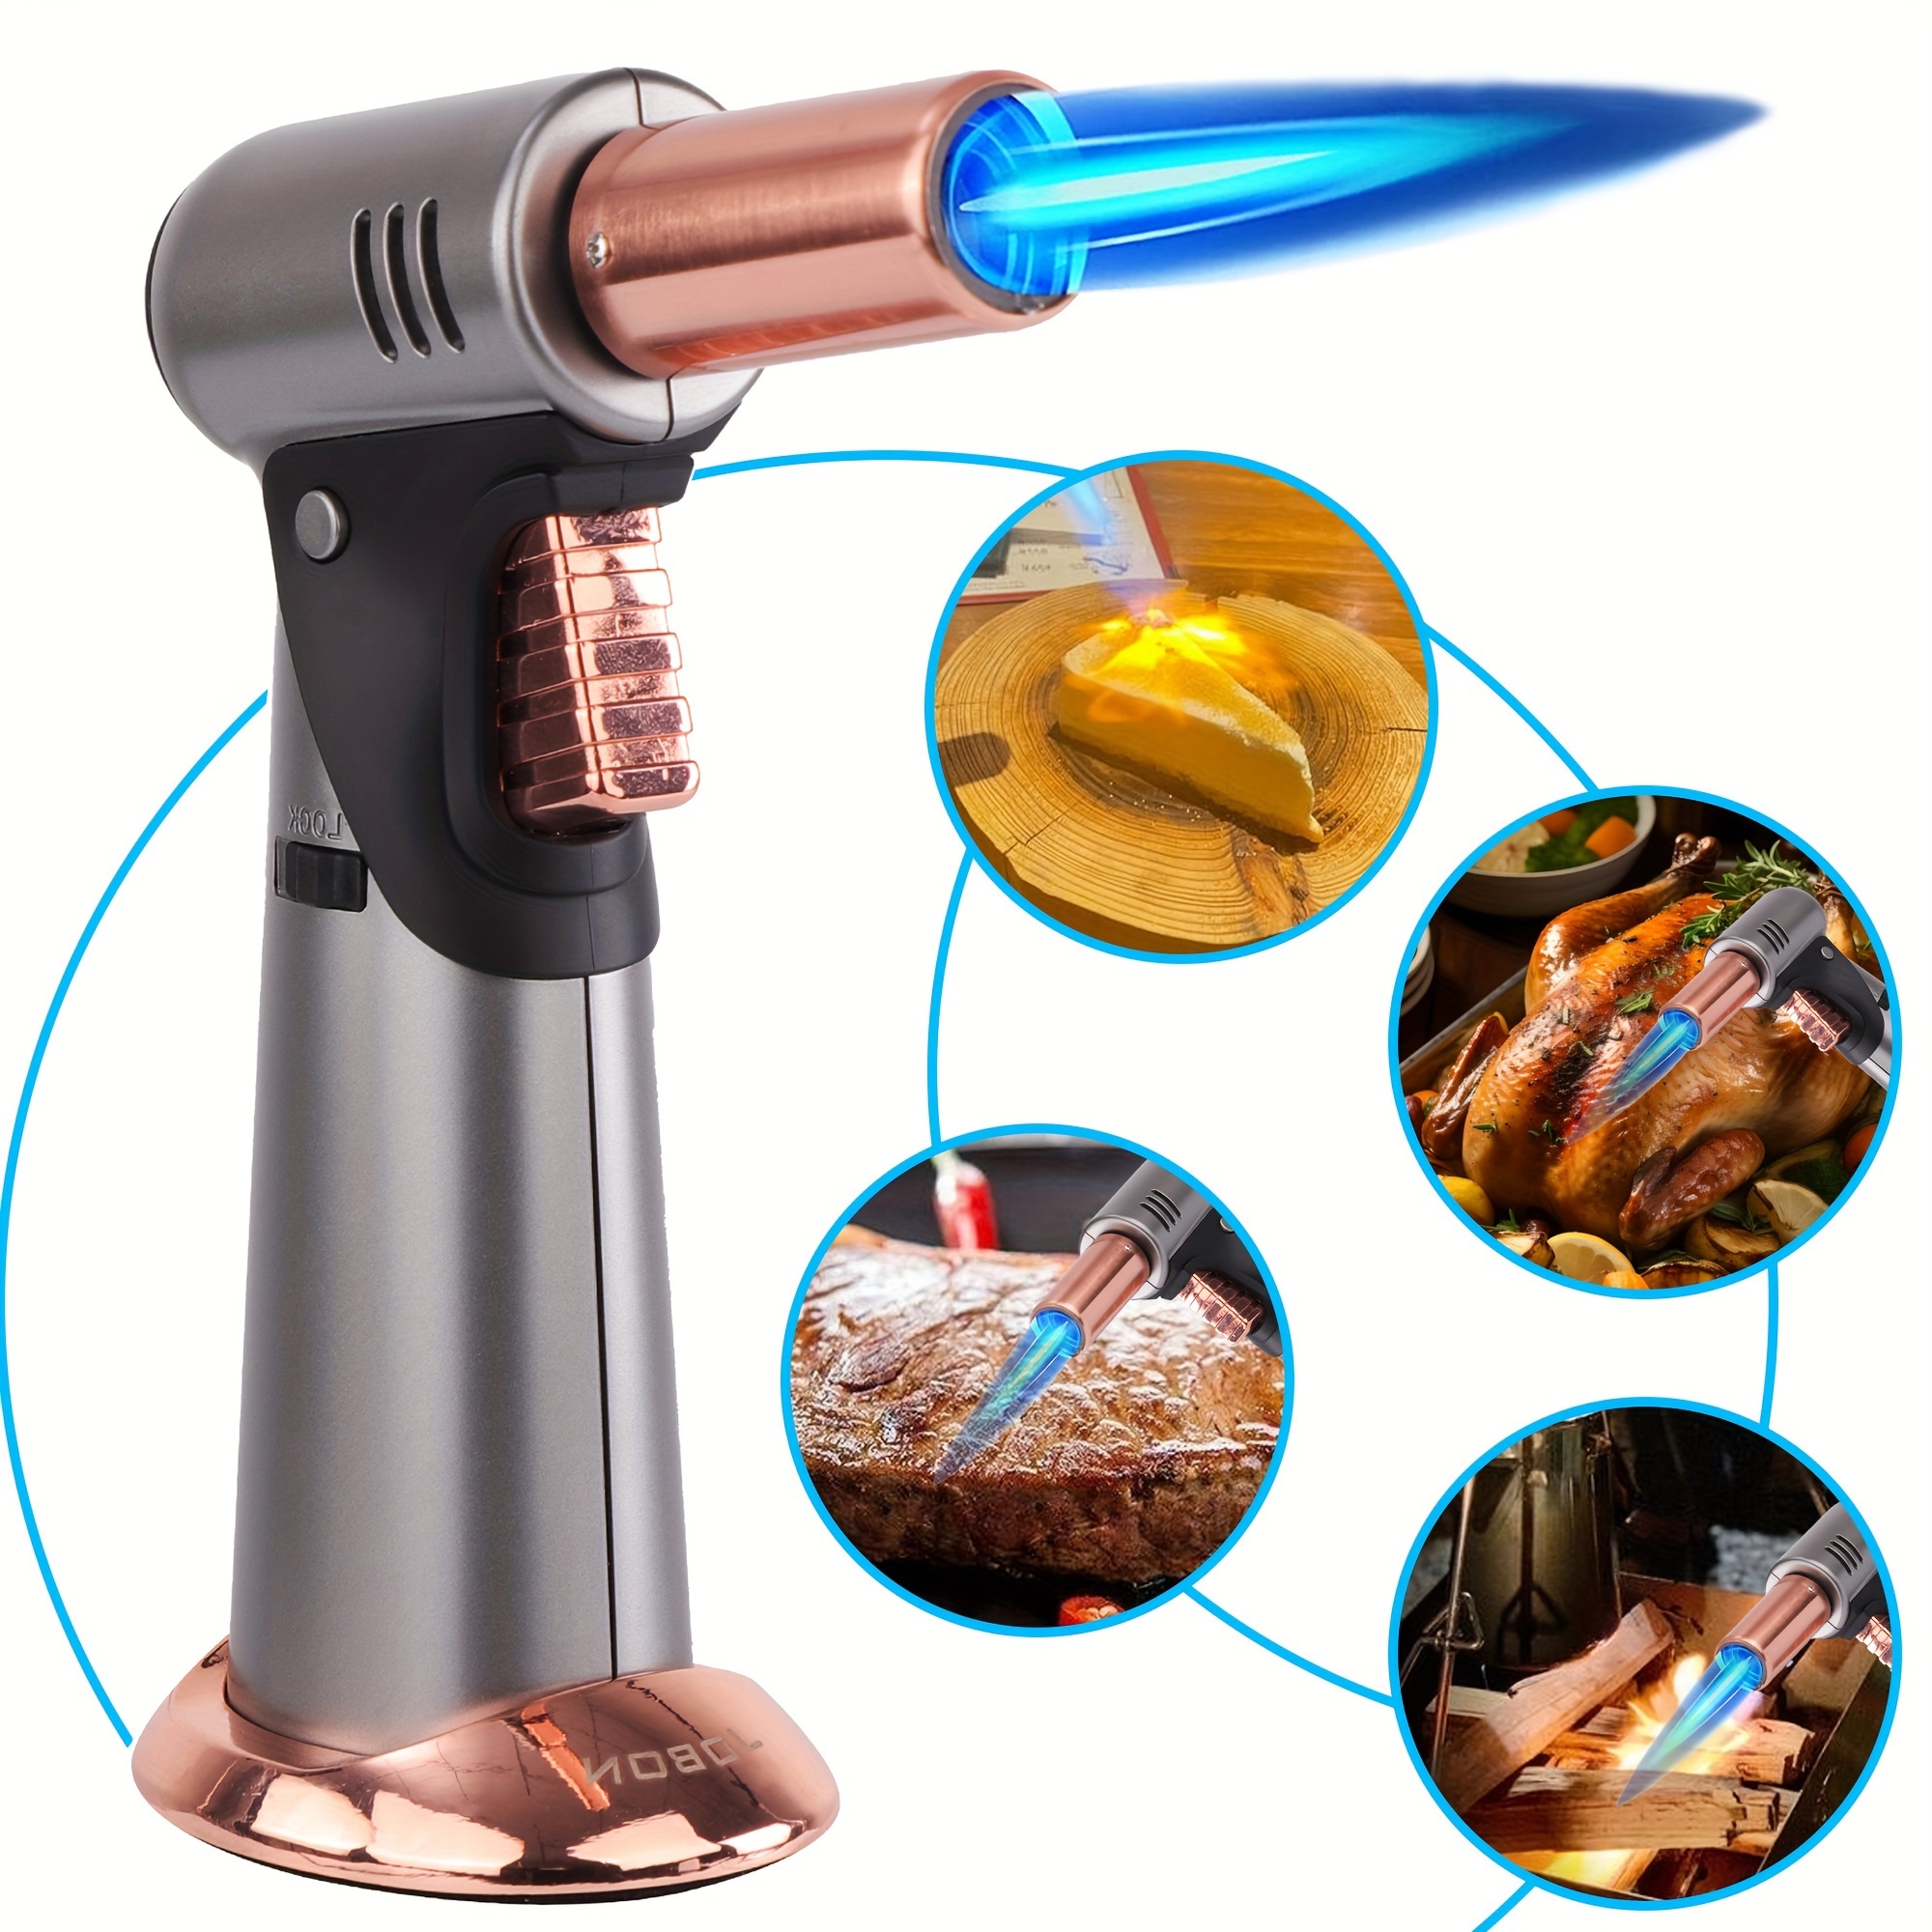 

Refillable Kitchen , Adjustable Refillable Multipurpose Culinary Blow Torch With With Flame Lock For Creme Brulee, Baking, Bbq (butane Gas Not Included)